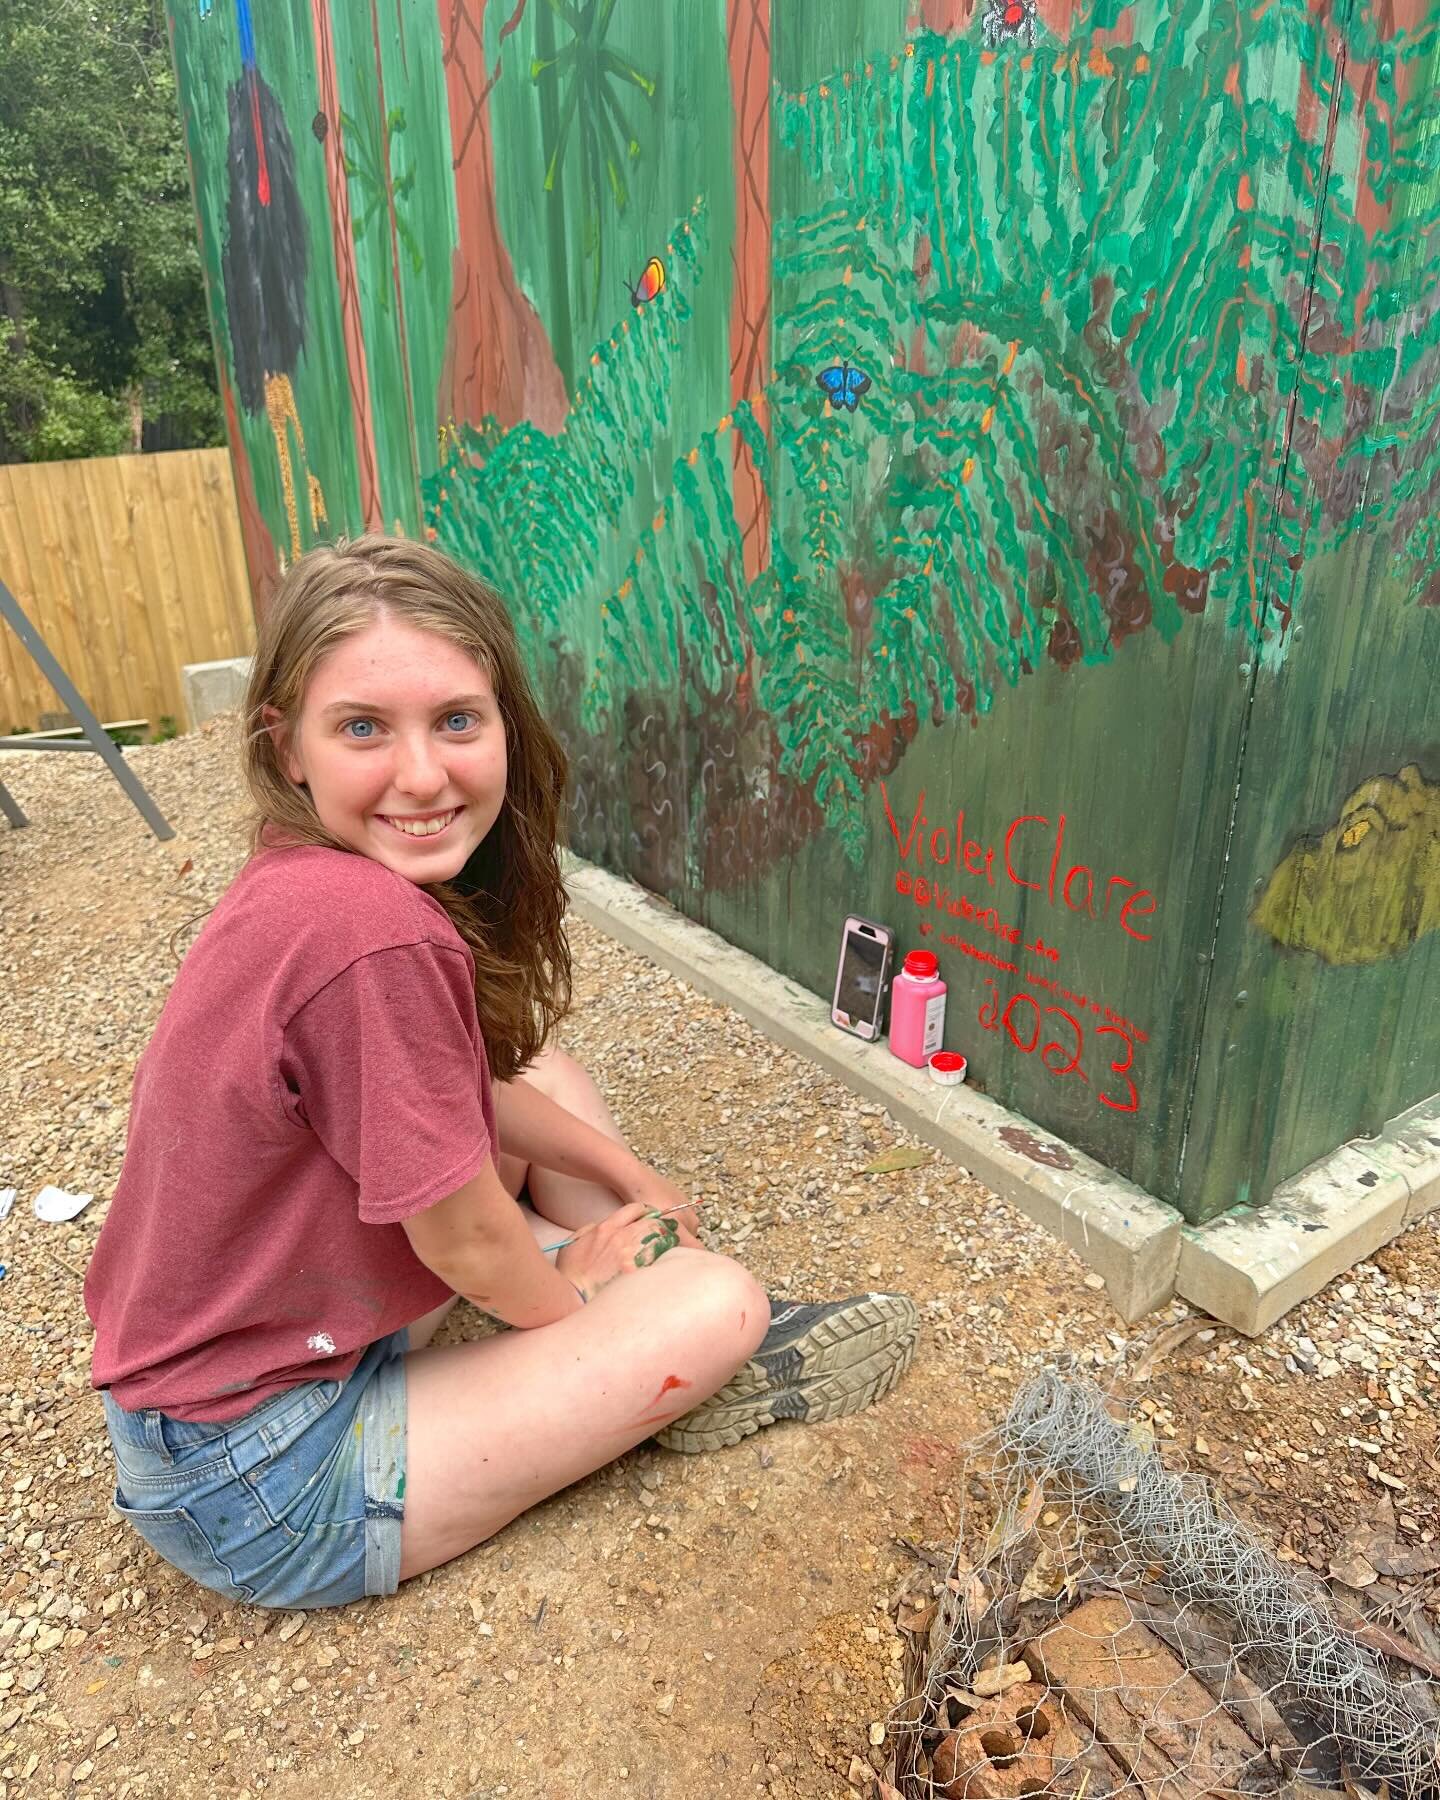 Our Aviary for Life student-led mural is complete! We have had a HUGE range of students help out along the journey to bring the vision to life. We have plenty more photos to come&hellip; 

We had a chat to Violet, one of the key drivers of this proje